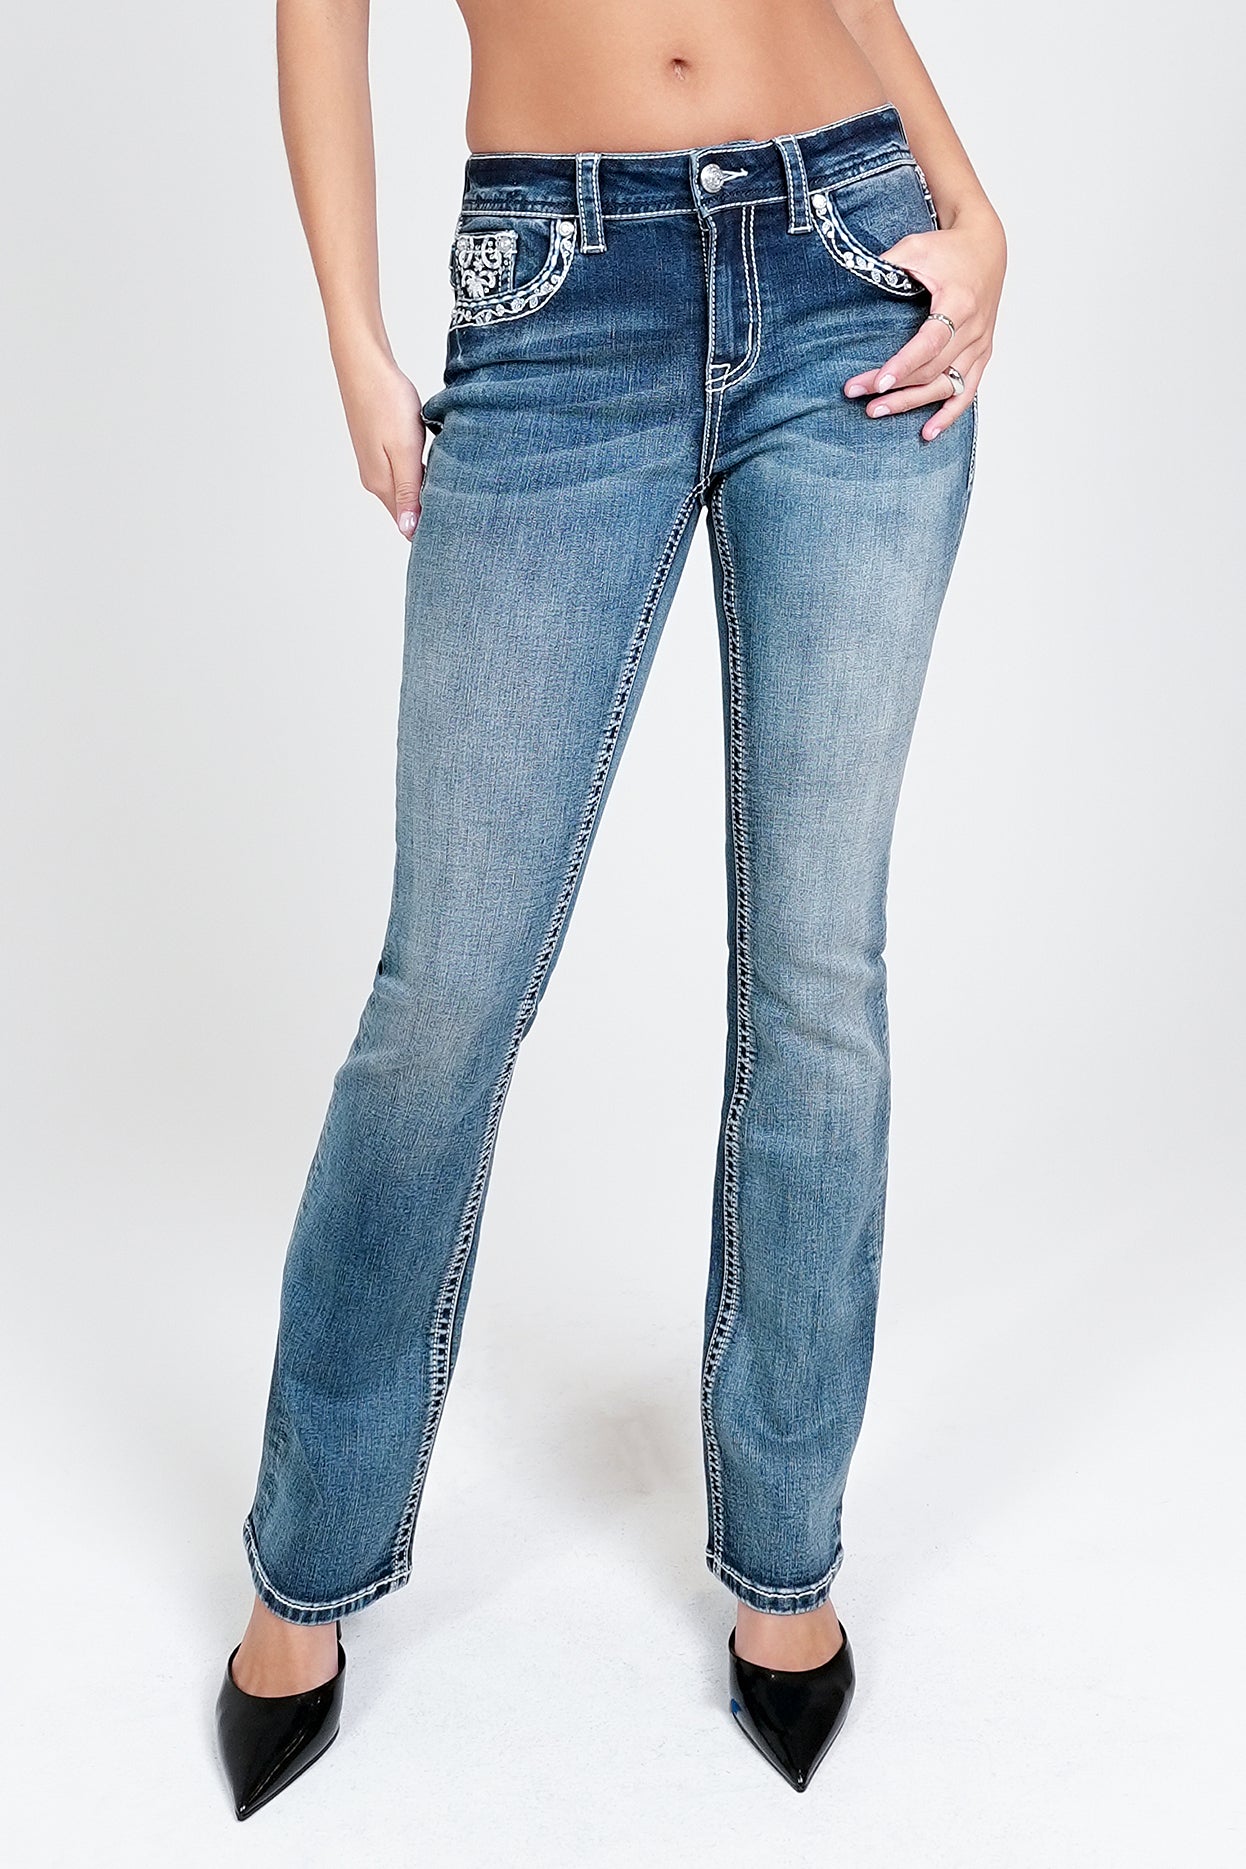 Western Embroidery Yoke Details Embellished Mid Rise Bootcut Jeans